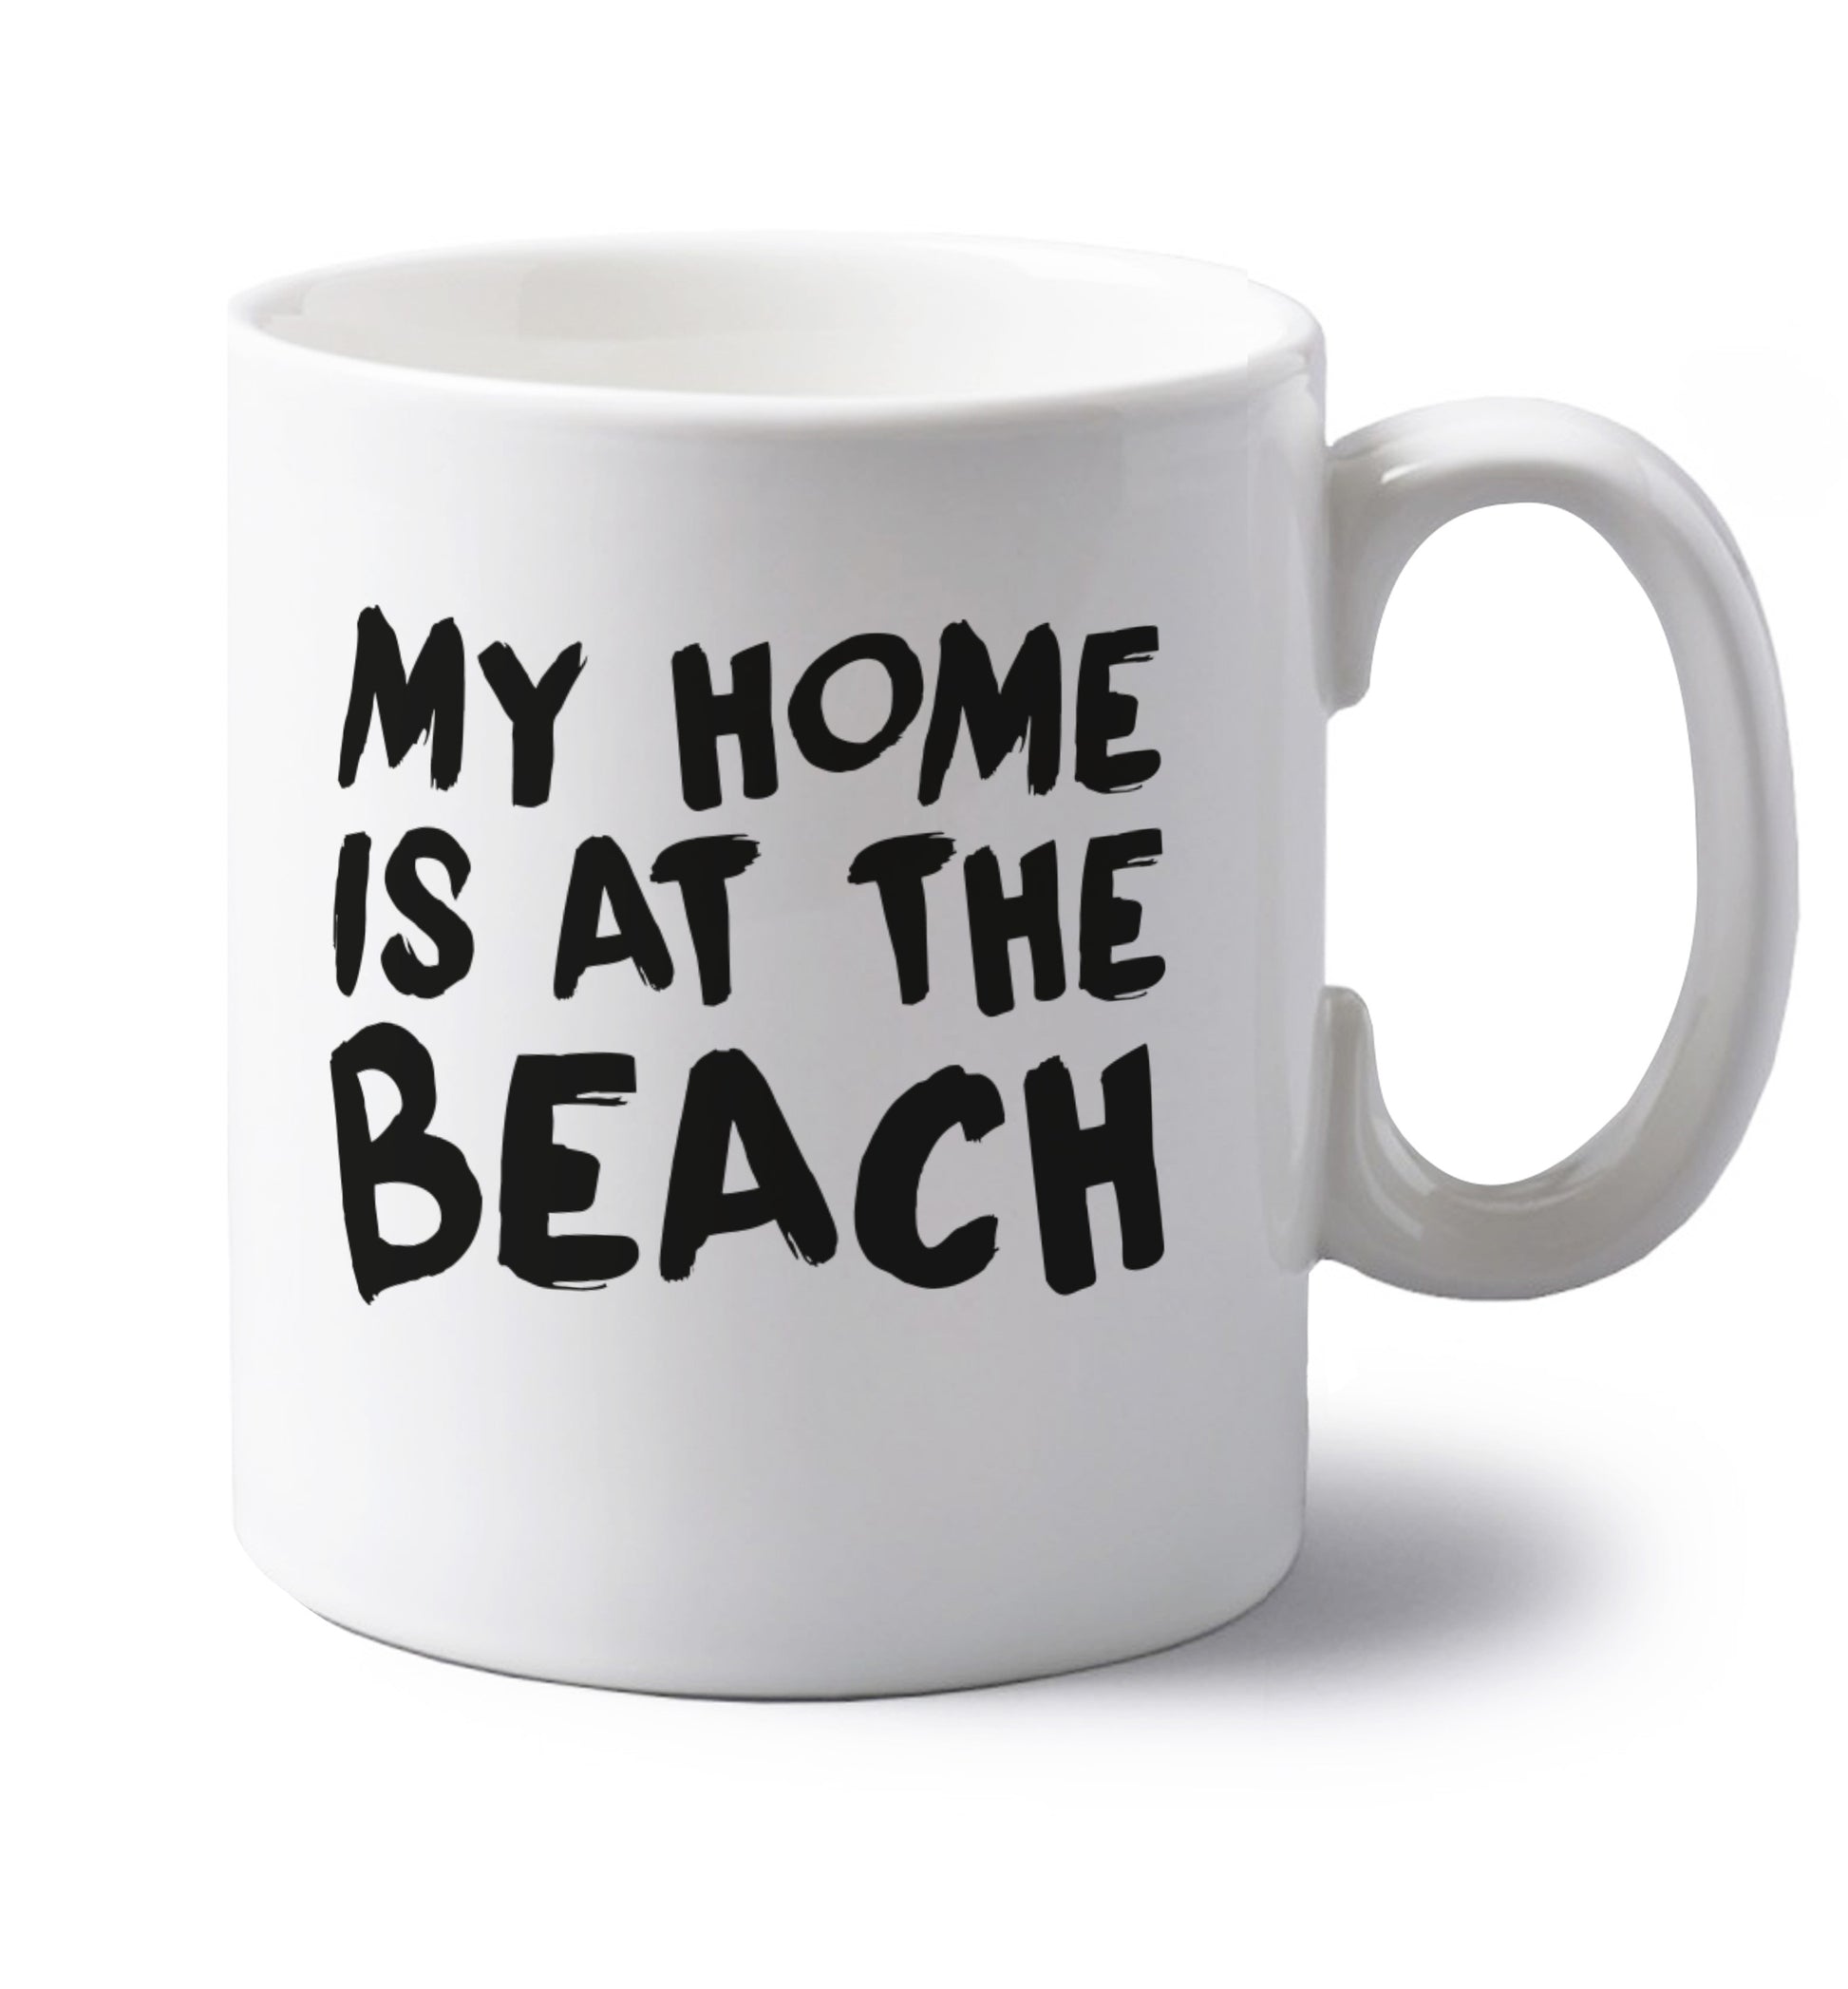 My home is at the beach left handed white ceramic mug 